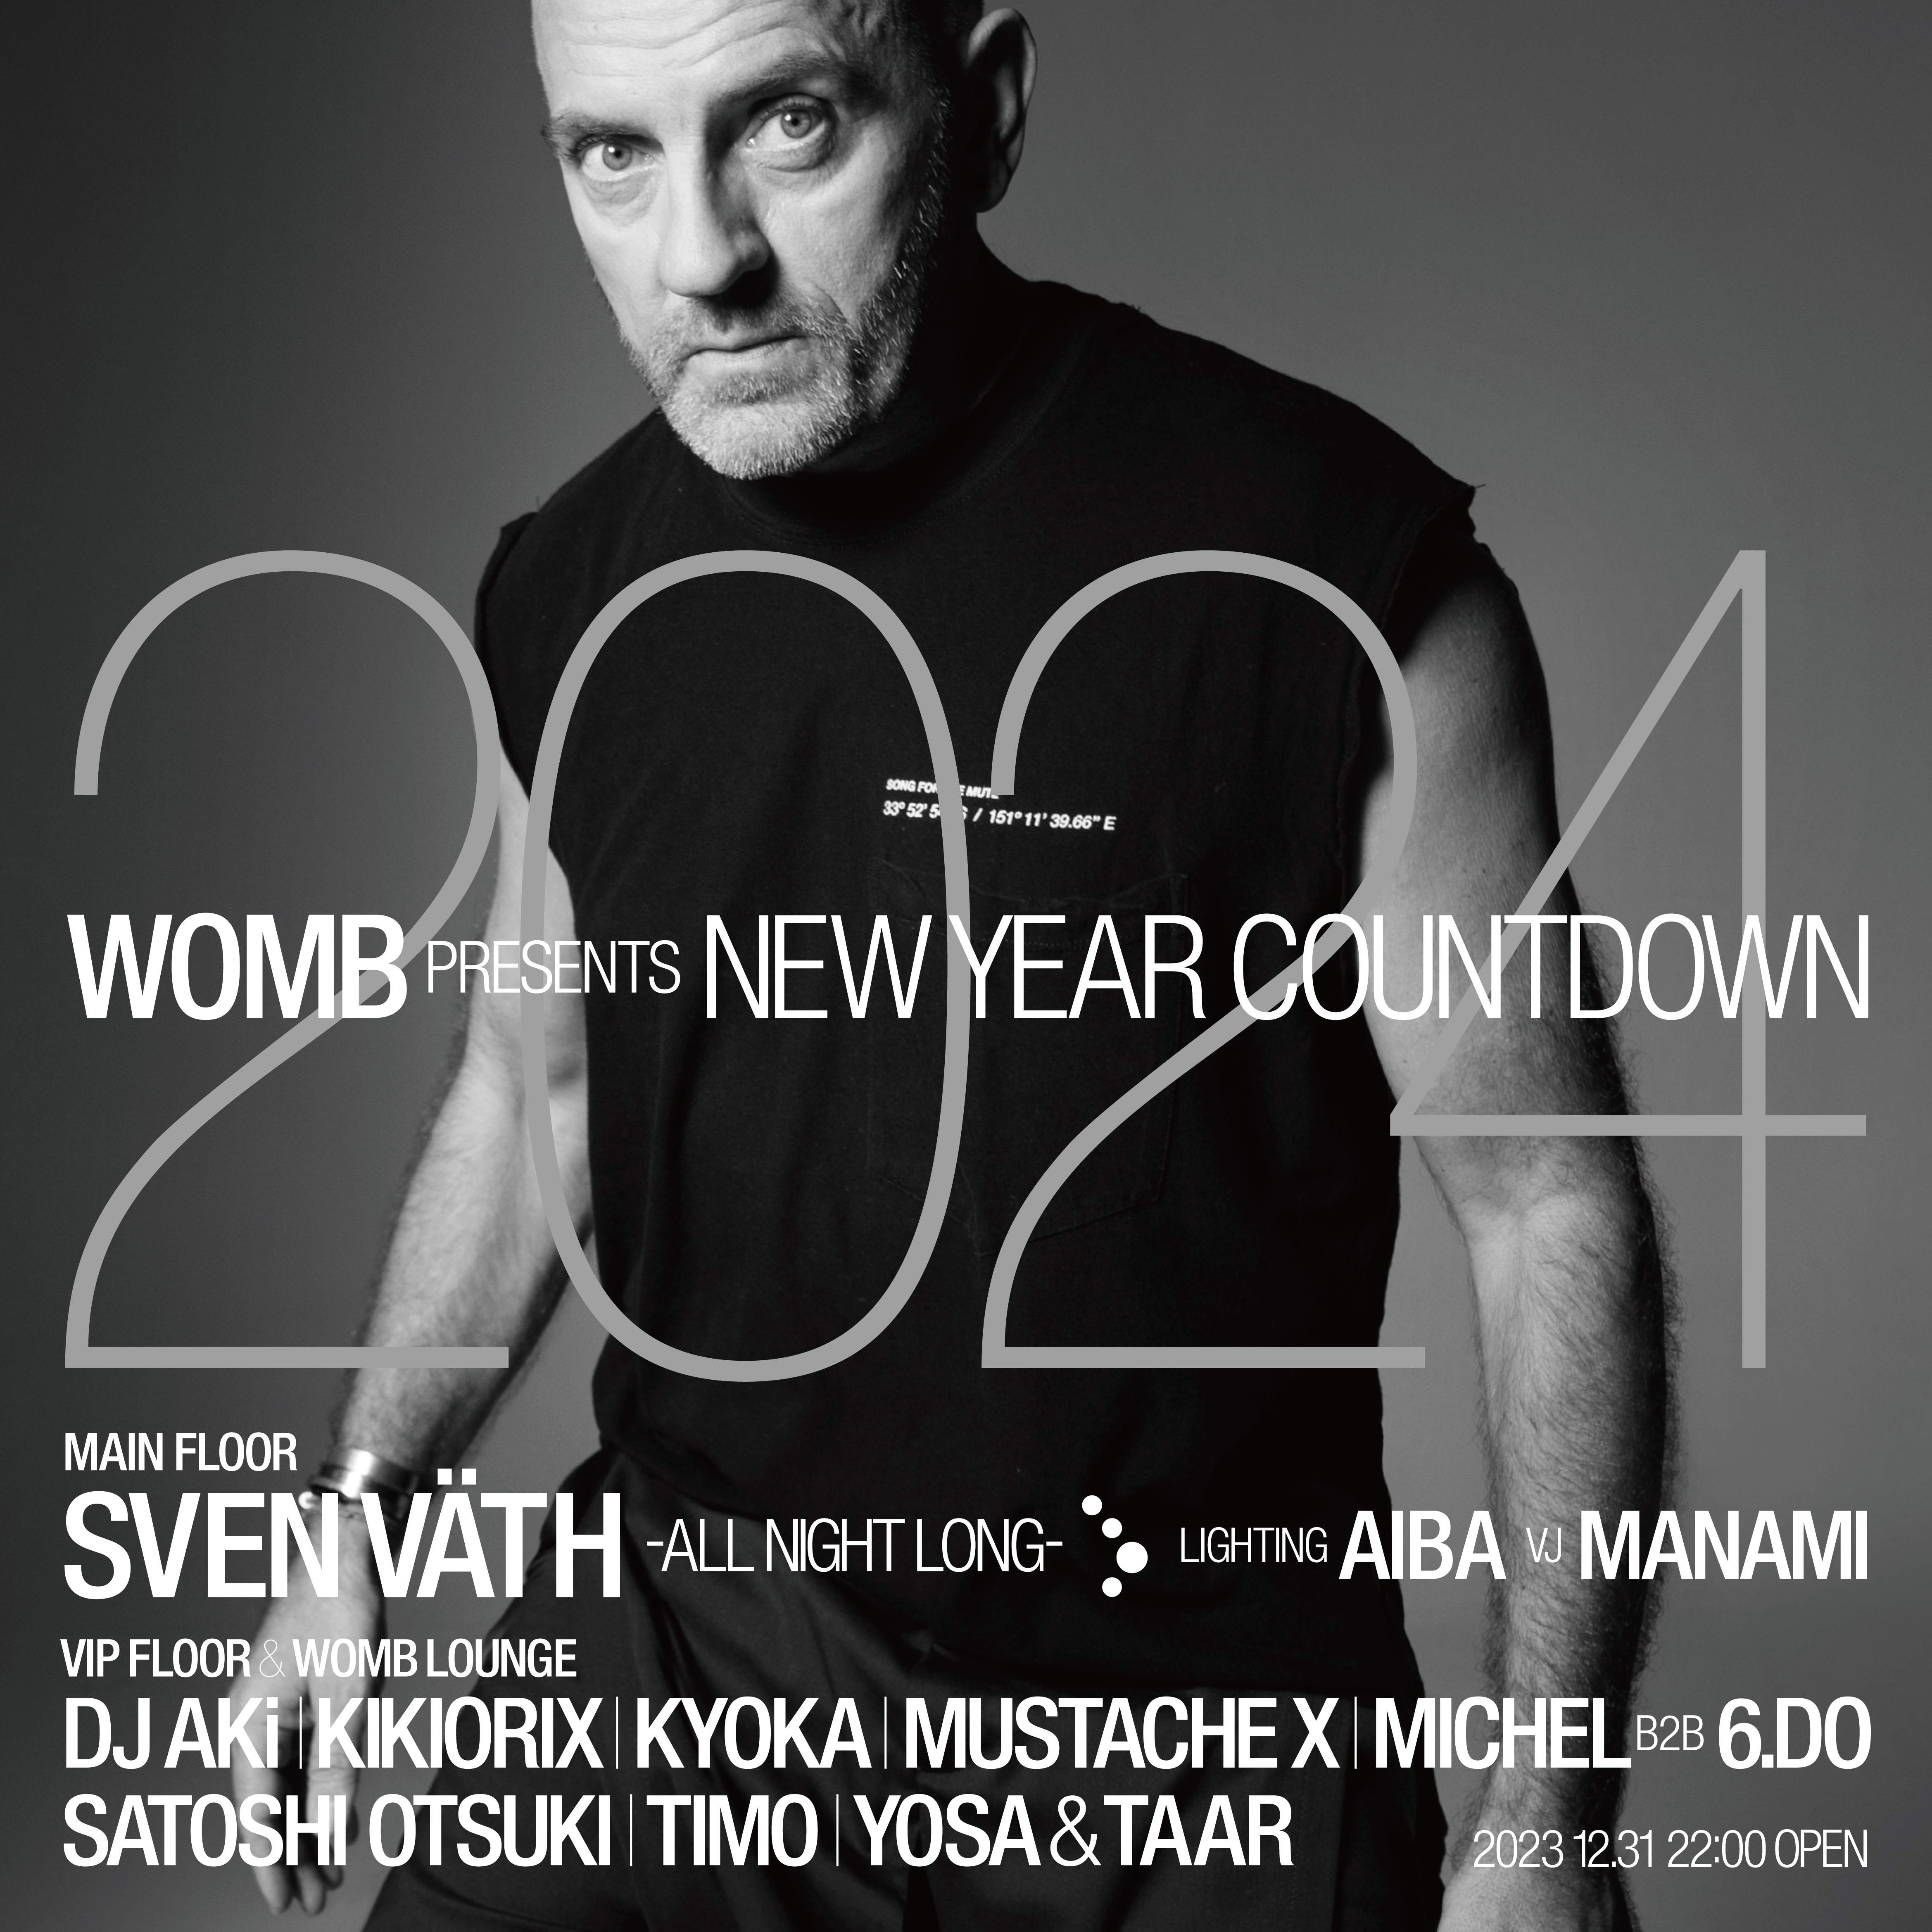 WOMB PRESENTS NEW YEAR COUNTDOWN TO 2024 - フライヤー表